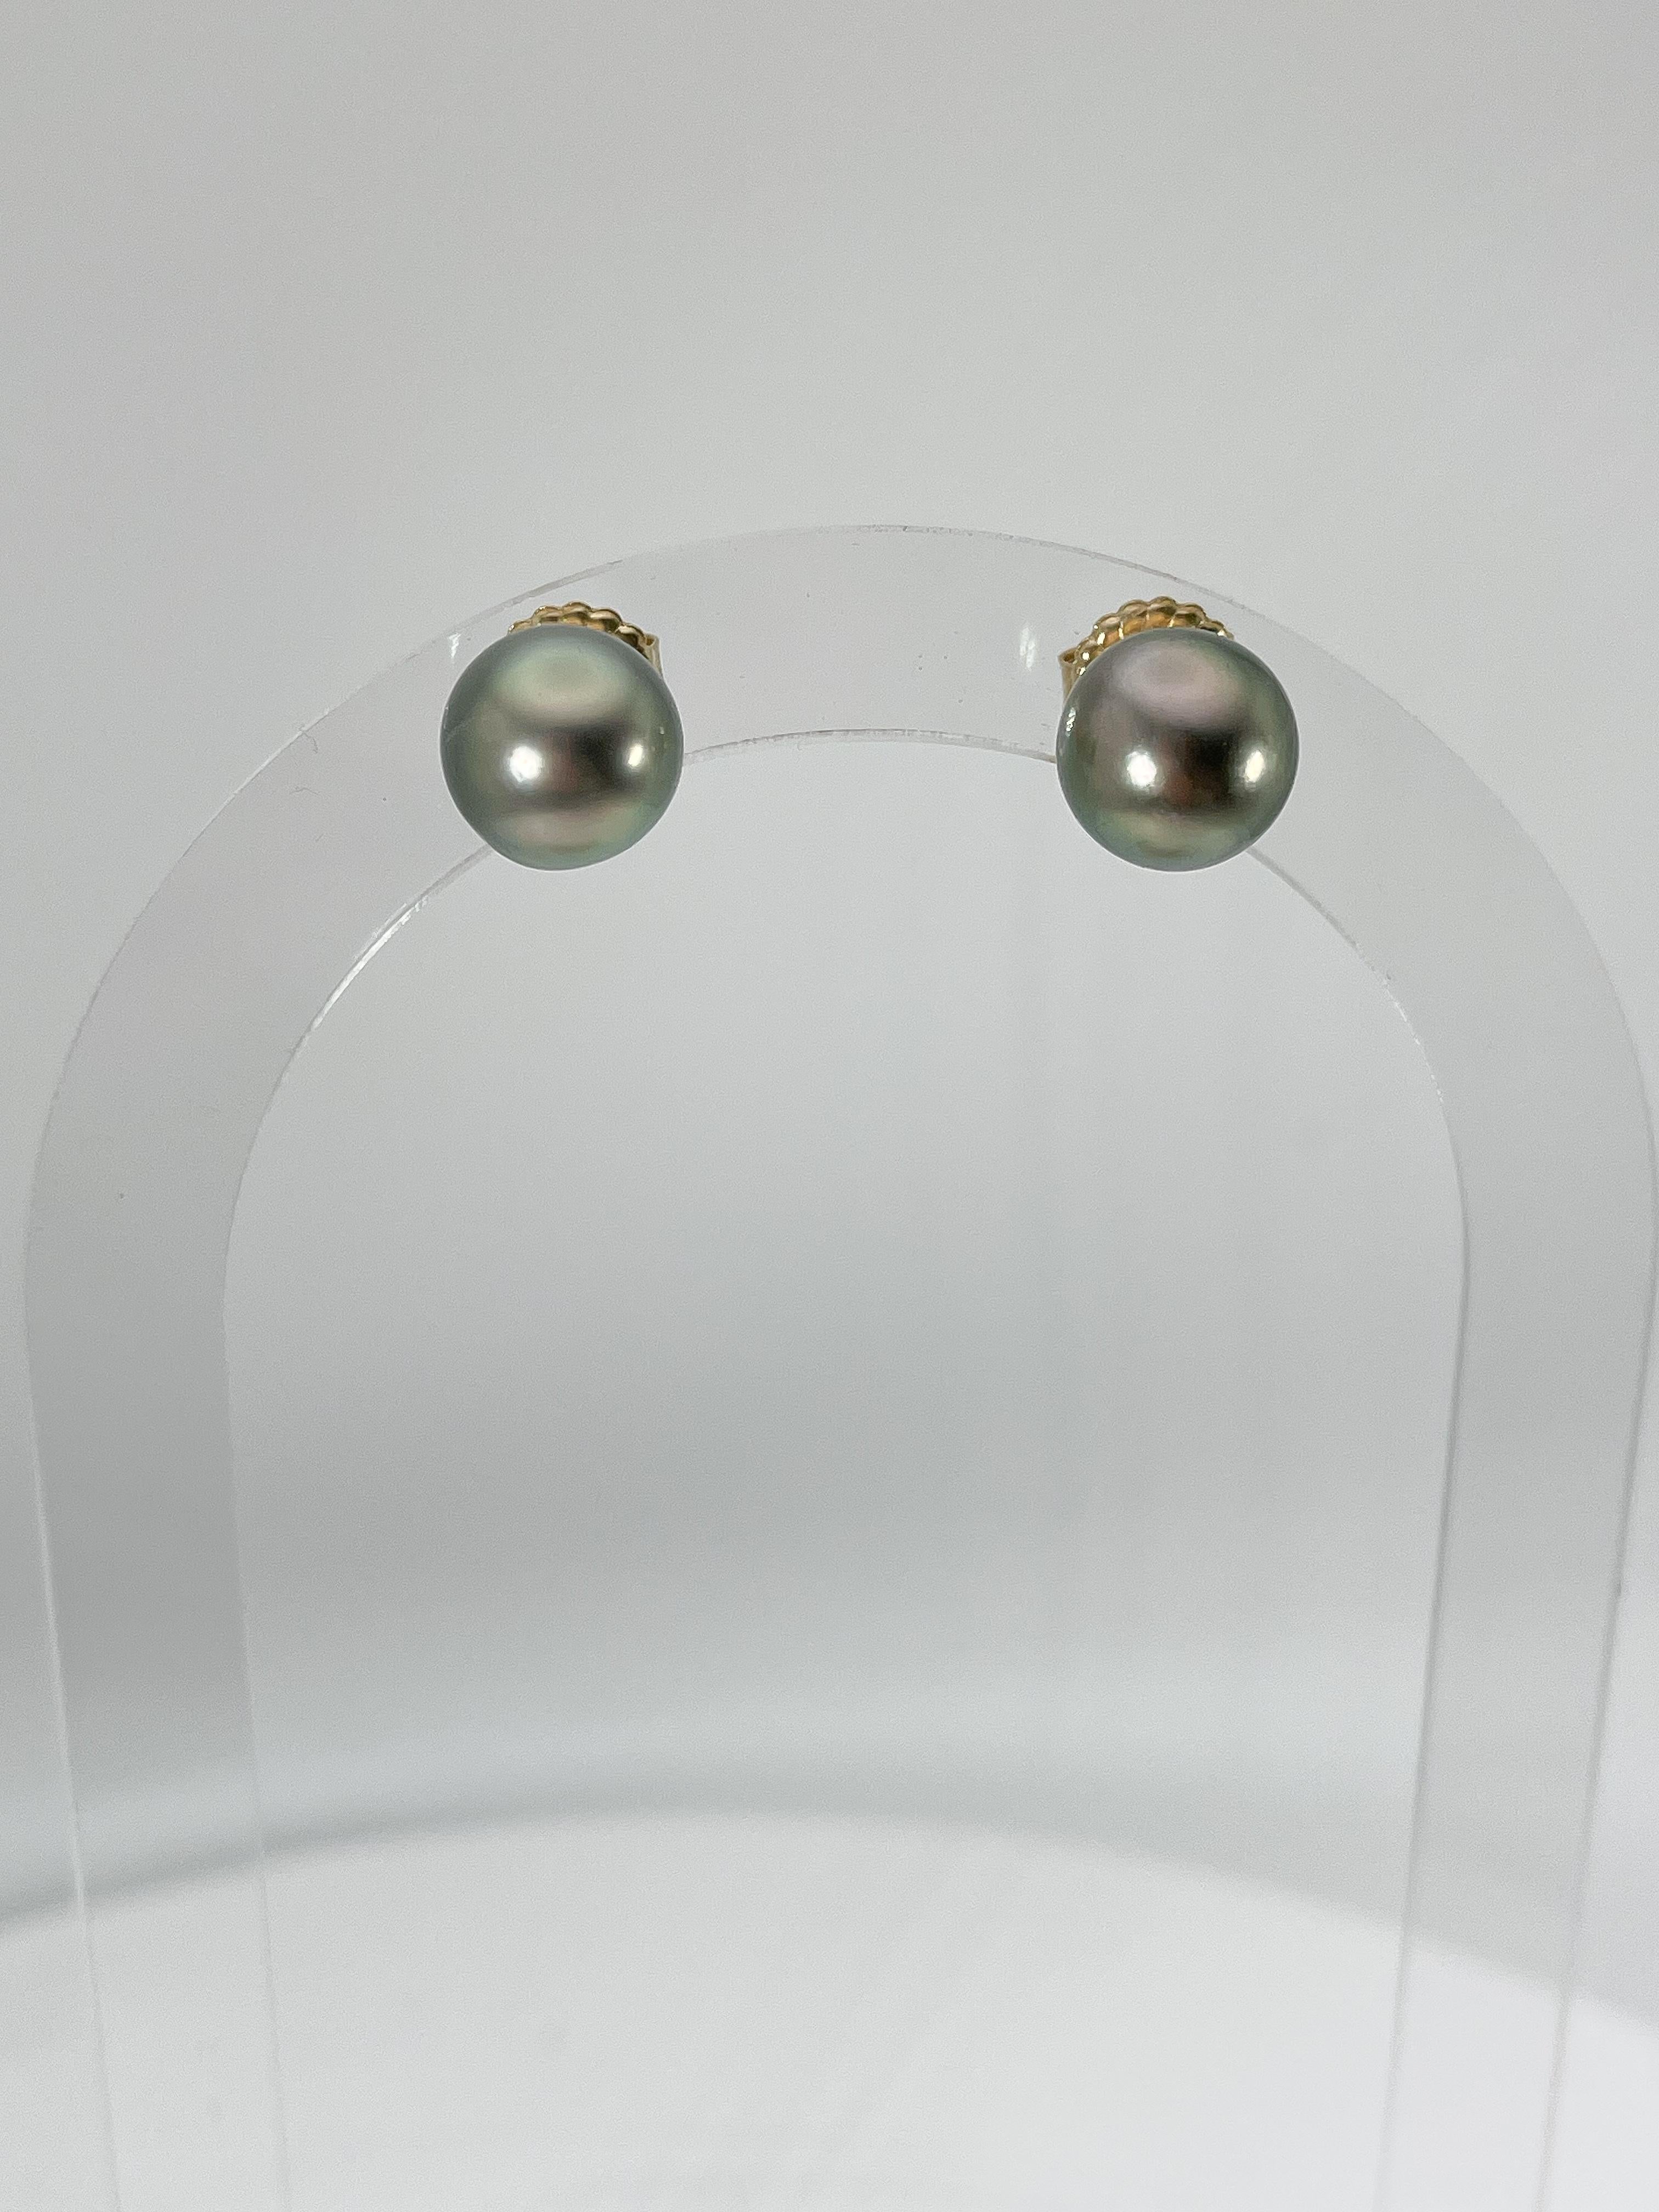 18k yellow gold Tahitian pearl studs. These earrings have a diameter of 11mm, and have a total weight of 4.3 grams.